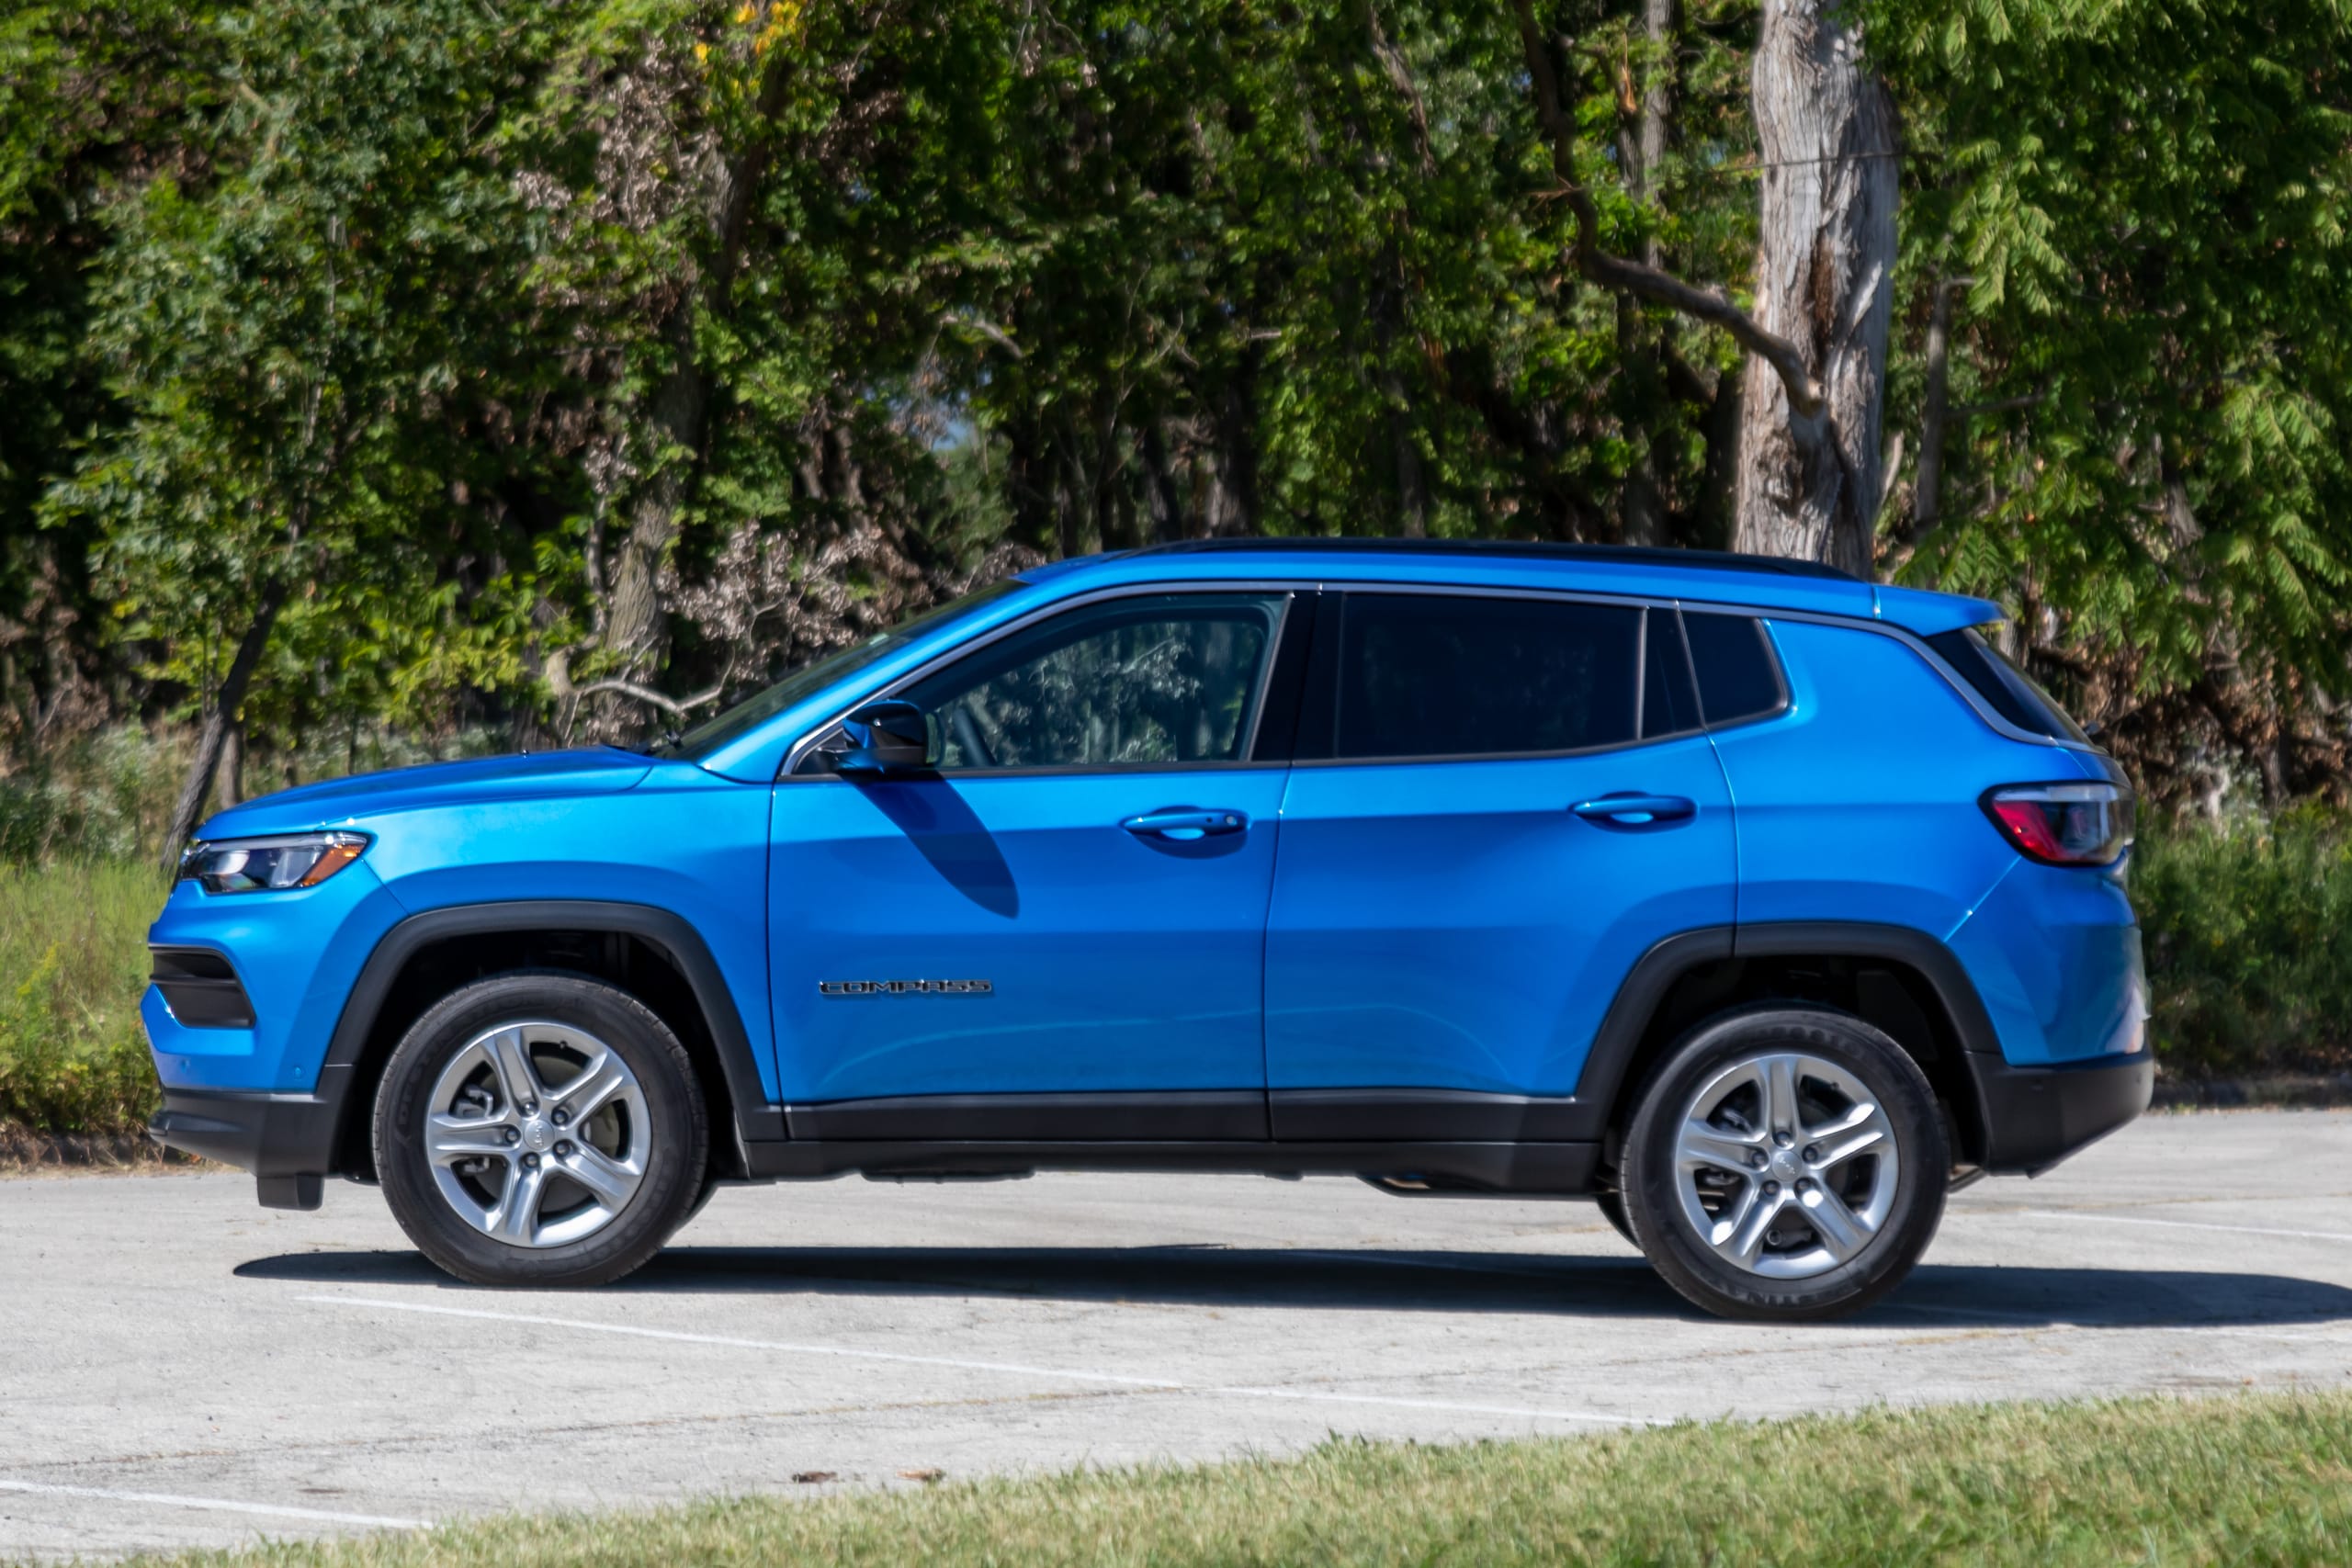 2023 Jeep Compass | Cars.com photo by Christian Lantry